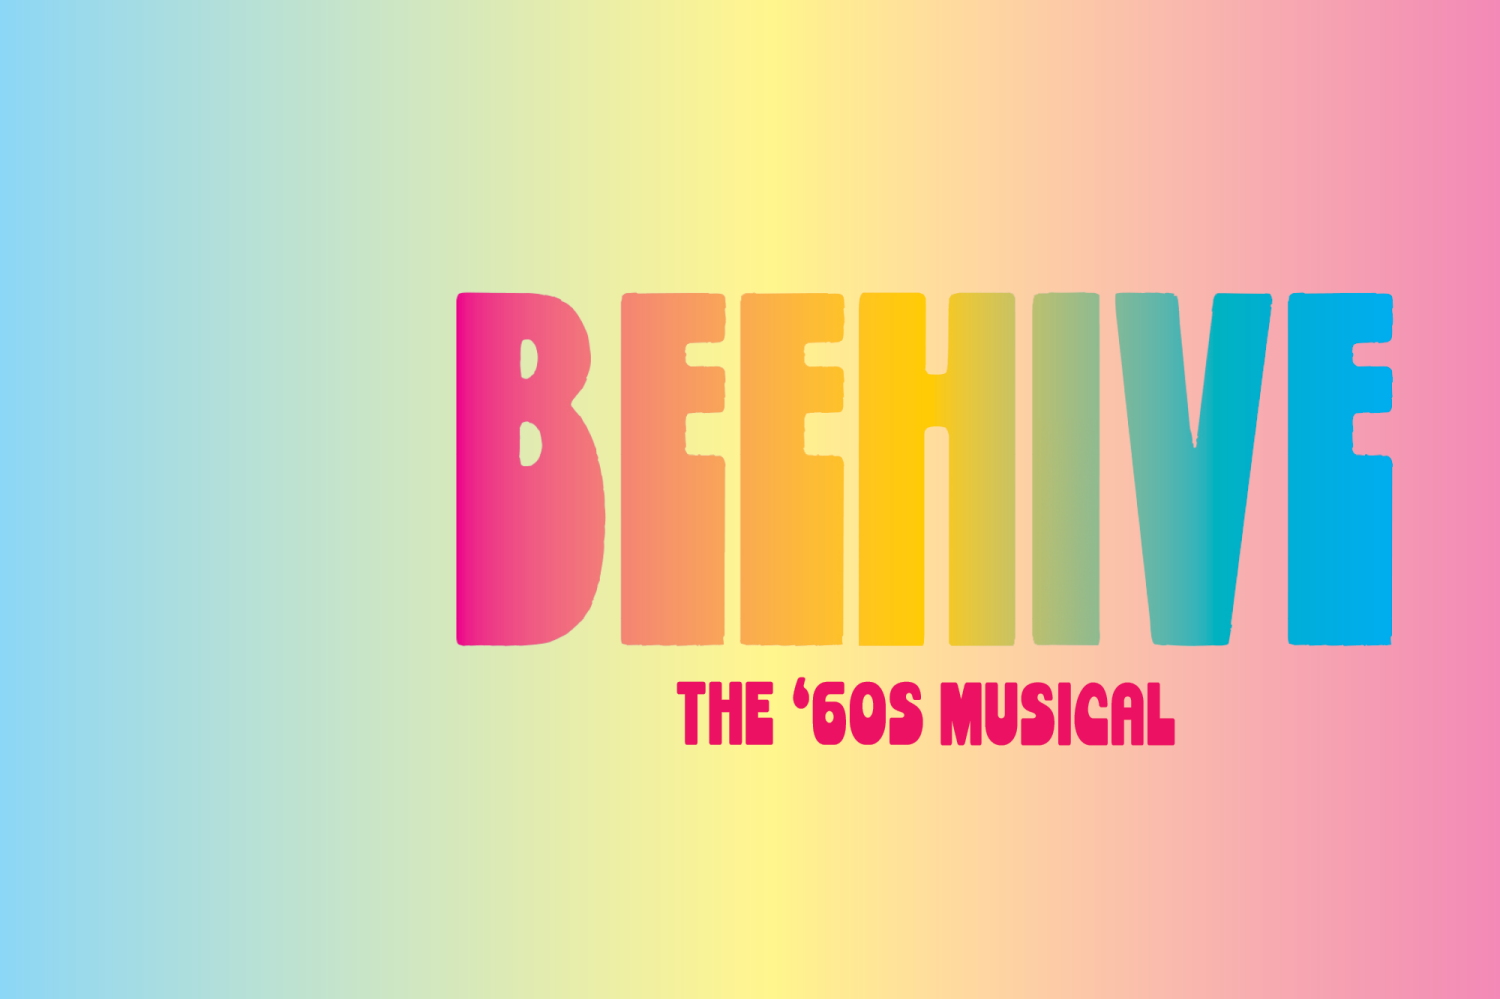 Show artwork for BEEHIVE, showing a pastel gradient and the title of the show